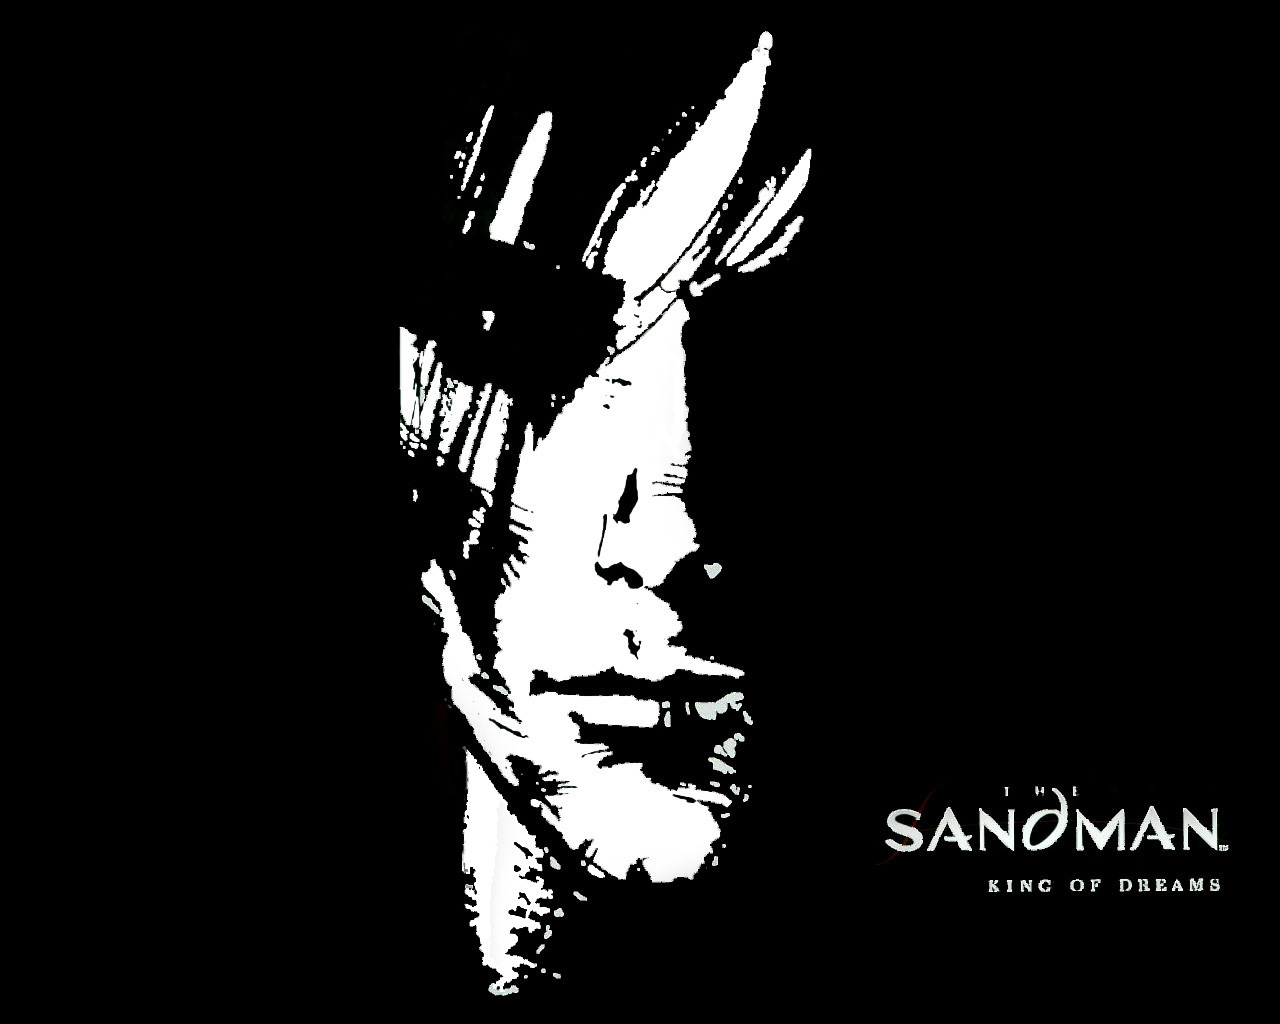 Sandman producer David Goyer also offered his own Sandman update, telling Deadline, “We have a draft Warners is very happy with and we're moving forward, ...